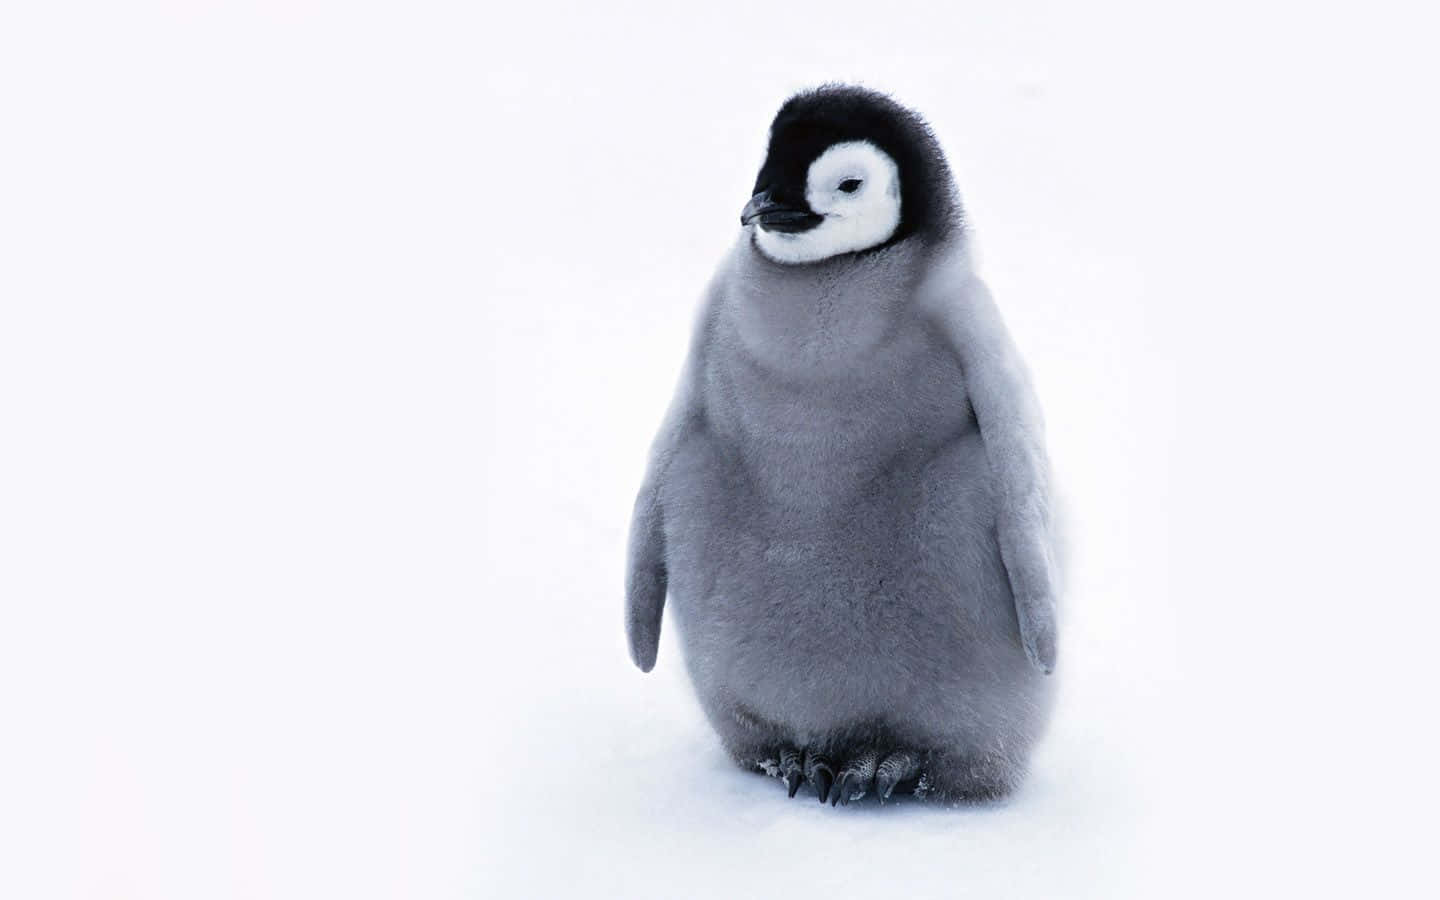 A baby penguin standing in the snow.